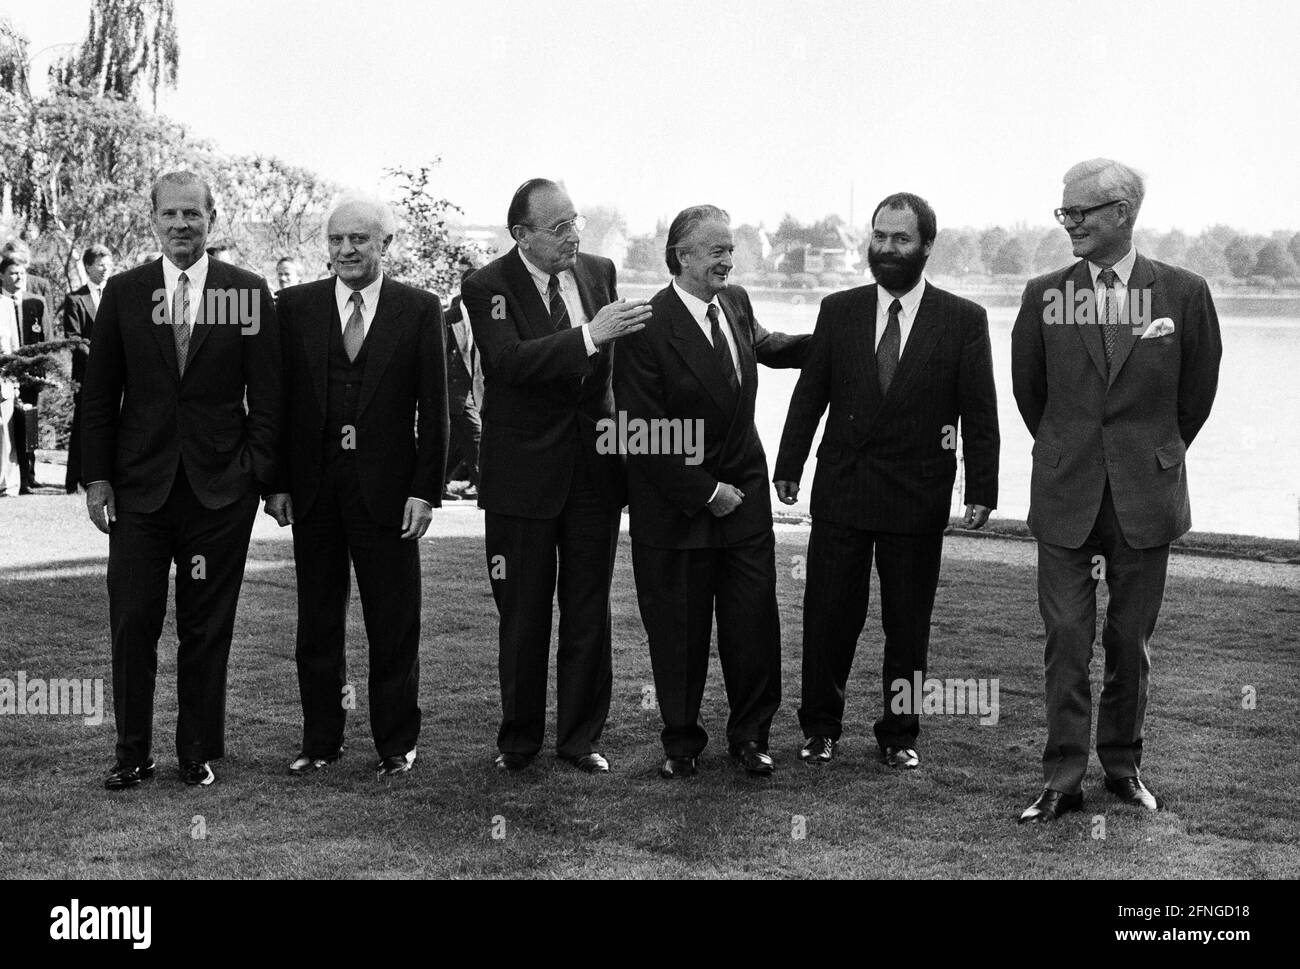 Germany, Bonn, 05.05.1990 Archive No: 15-67-12 2 4 Talks Photo: from left to right: James Baker (USA), Eduard Shevardnadze (USSR), Hans-Dietrich Genscher (FRG), Roland Dumas (France), Markus Meckel (GDR) and Douglas Hurt (Great Britain) [automated translation] Stock Photo